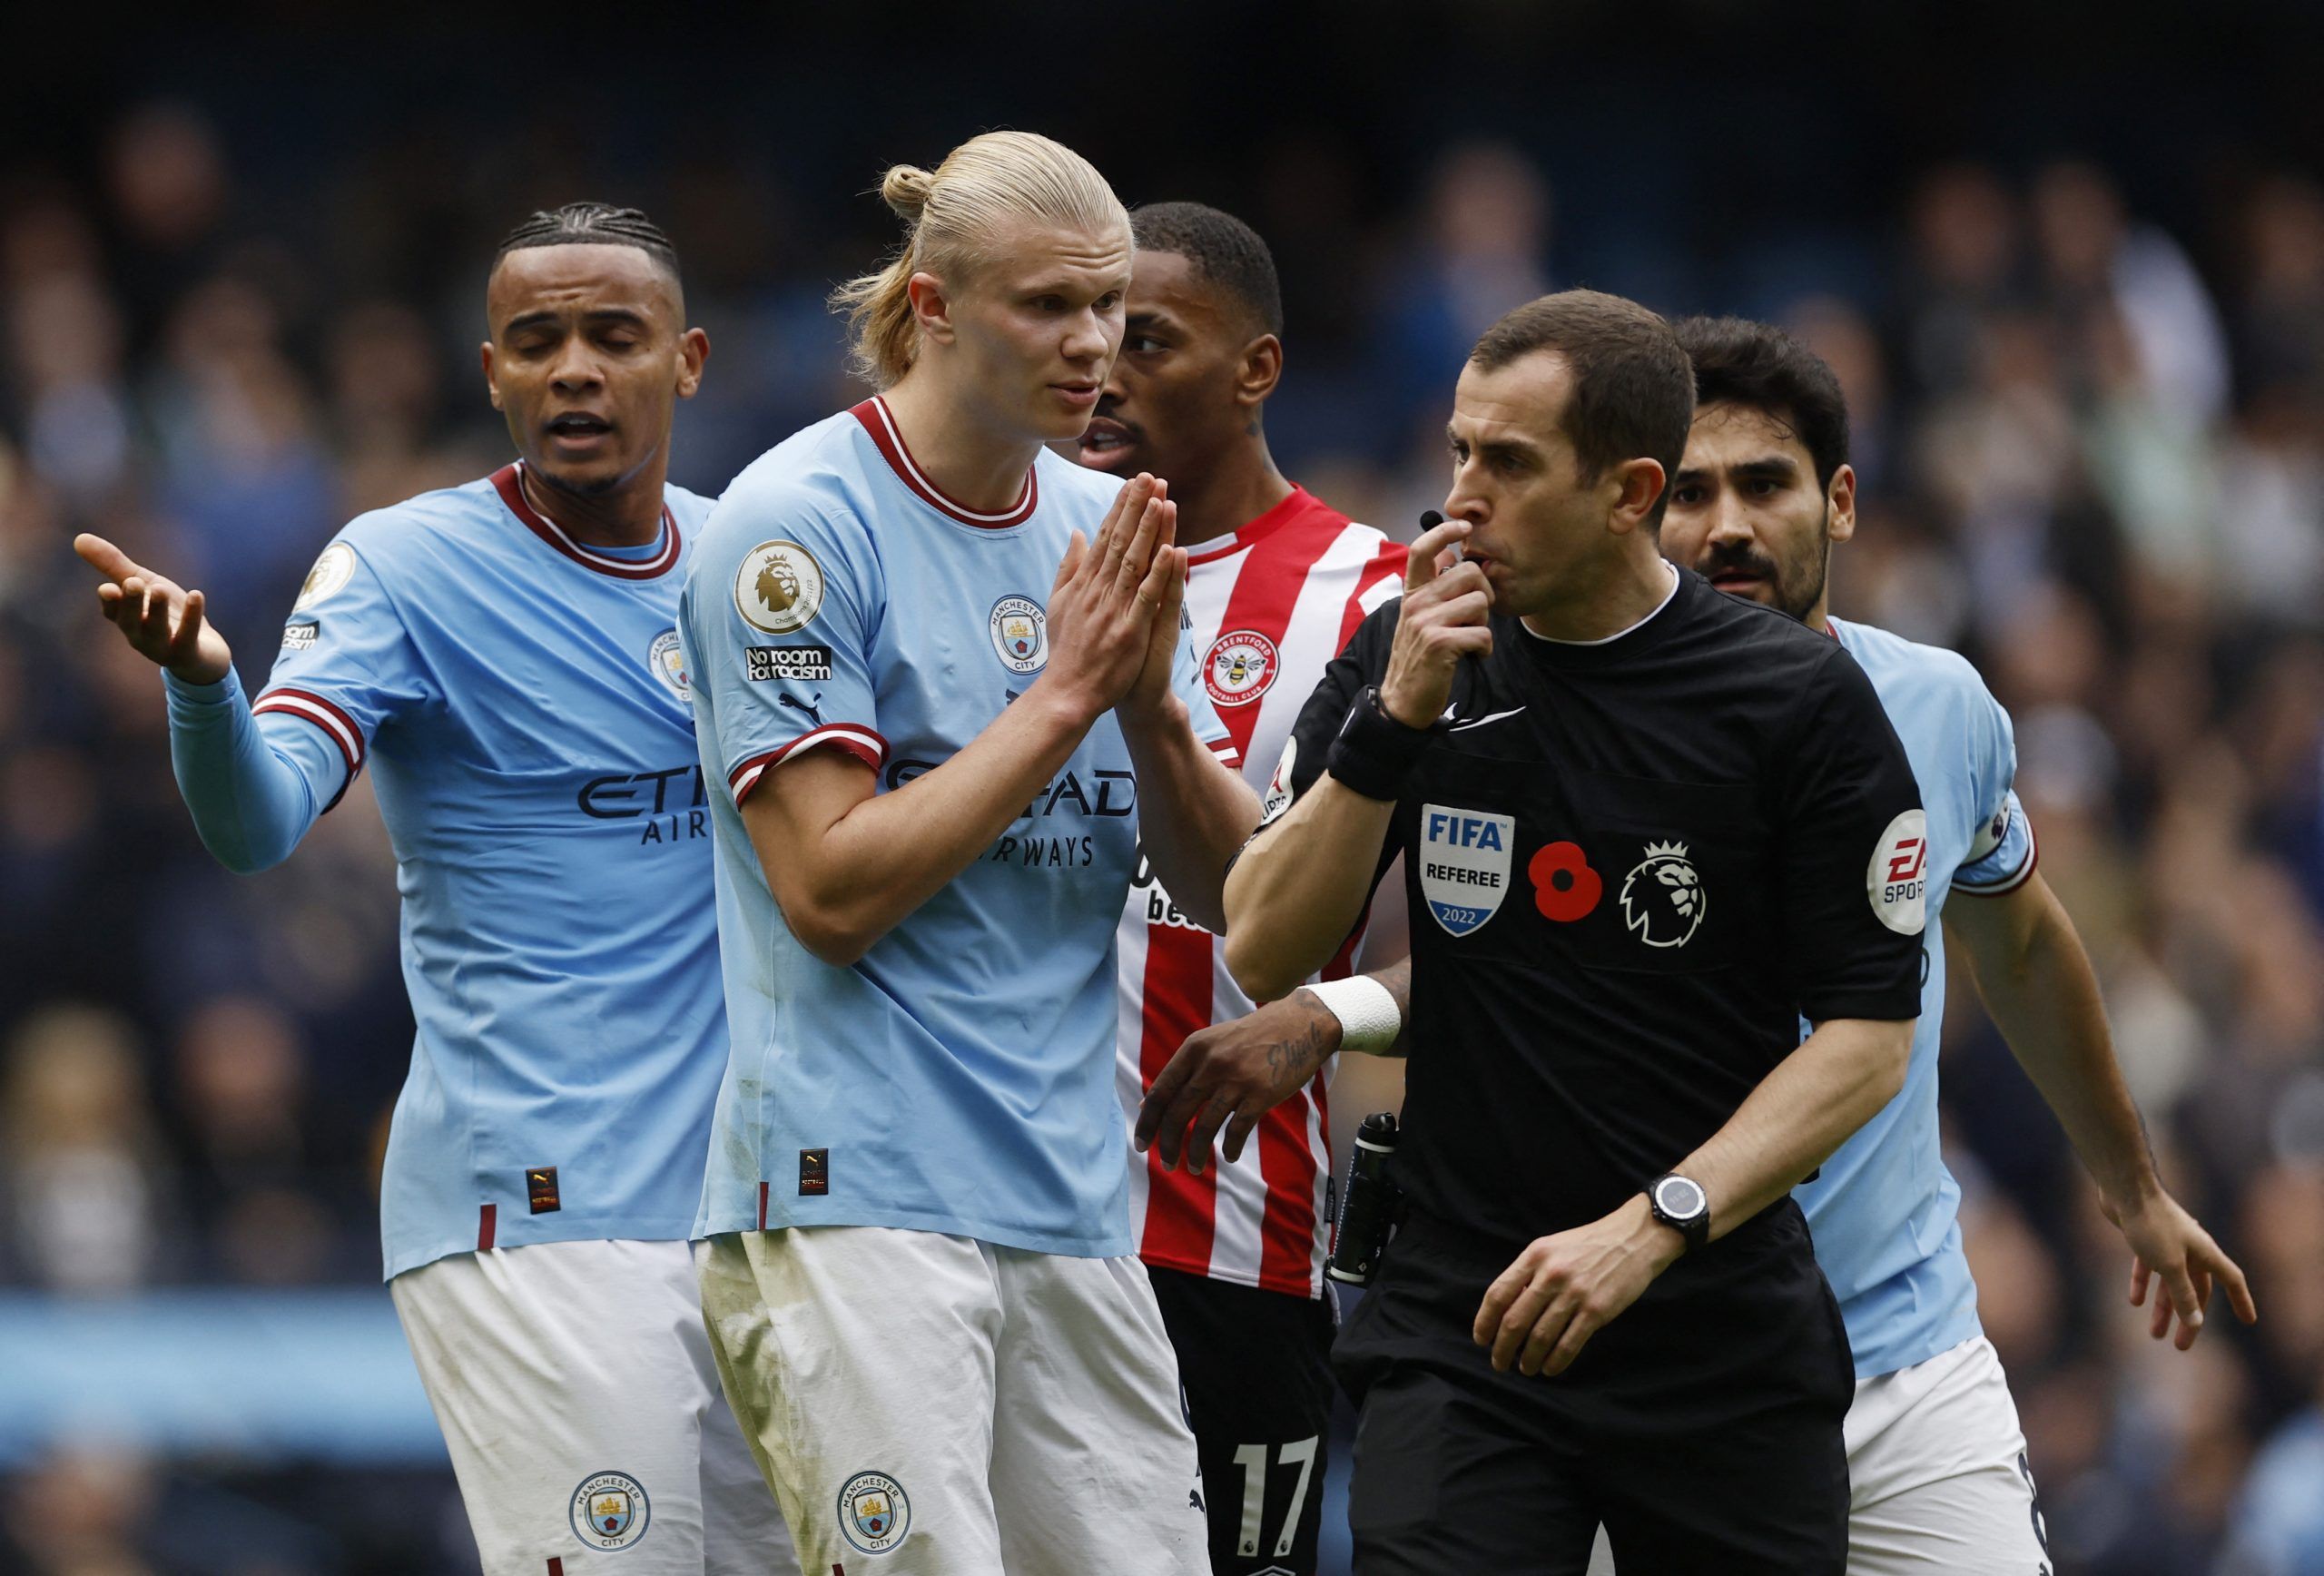 Soccer Football - Premier League - Manchester City v Brentford - Etihad Stadium, Manchester, Britain - November 12, 2022 Manchester City's Erling Braut Haaland, Ilkay Gundogan and Manuel Akanji remonstrate with referee Peter Bankes Action Images via Reuters/Jason Cairnduff EDITORIAL USE ONLY. No use with unauthorized audio, video, data, fixture lists, club/league logos or 'live' services. Online in-match use limited to 75 images, no video emulation. No use in betting, games or single club /leagu